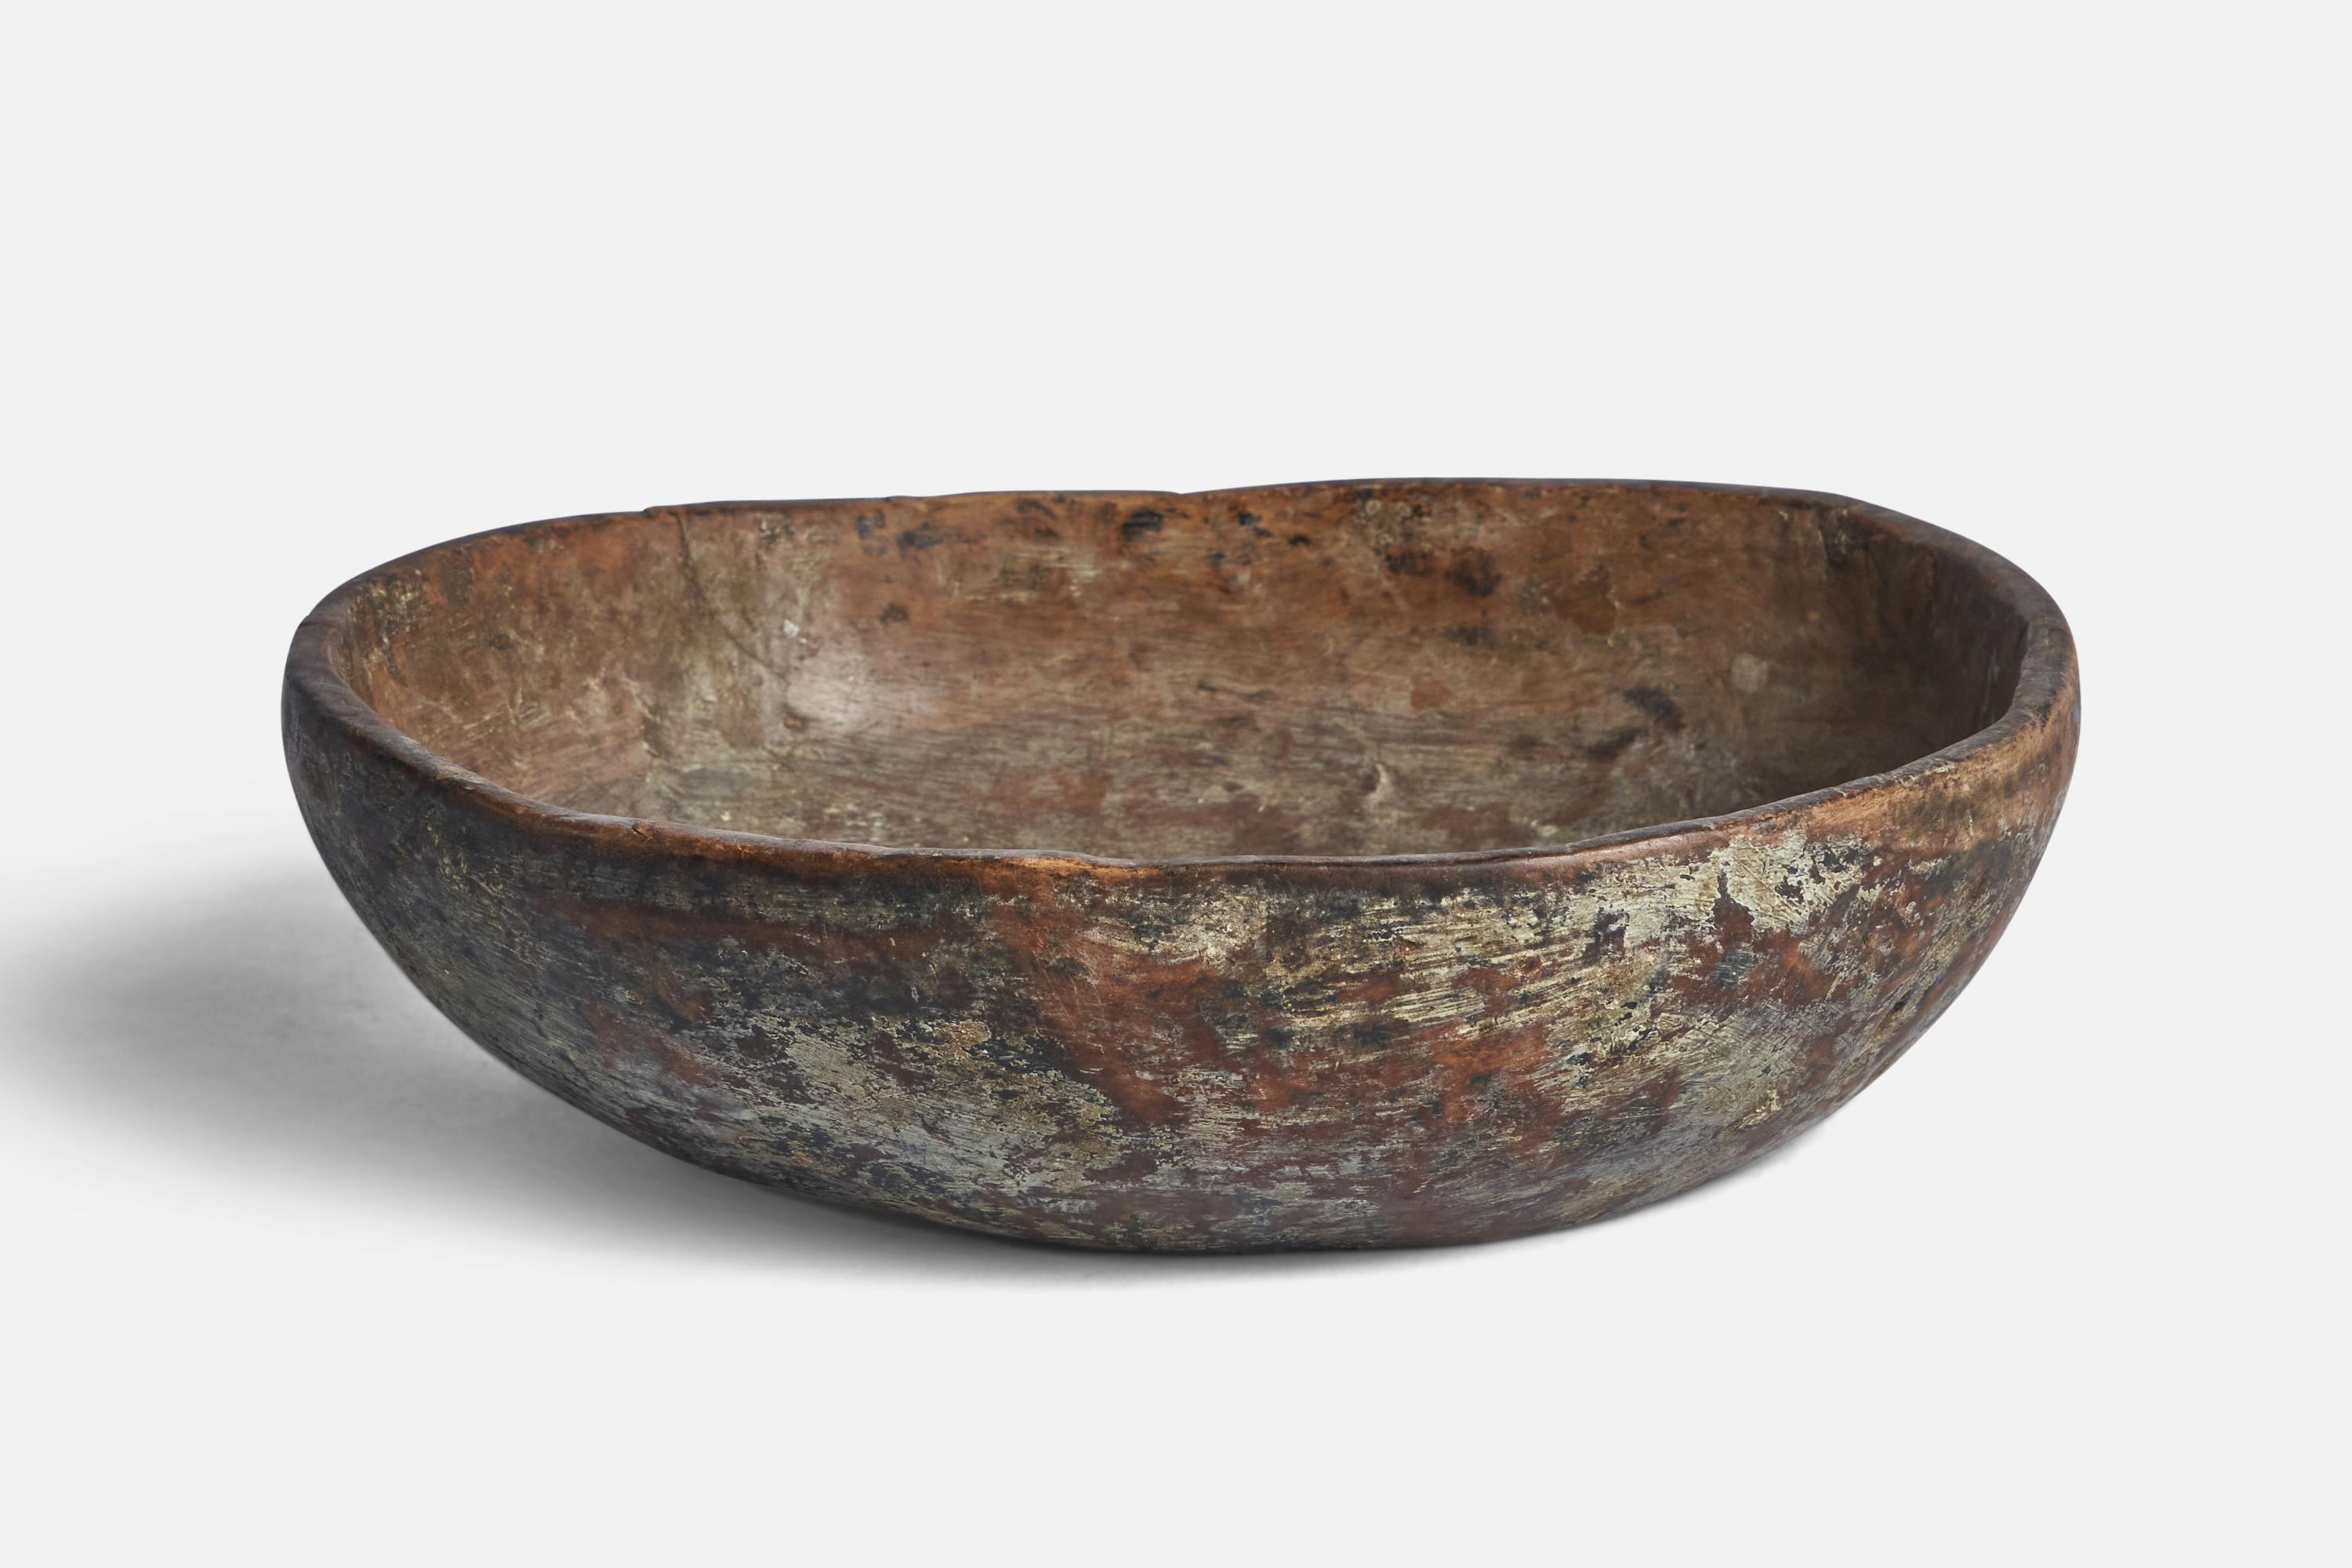 A wood bowl produced in Sweden, 19th century.

“HLHS” inscription on bottom